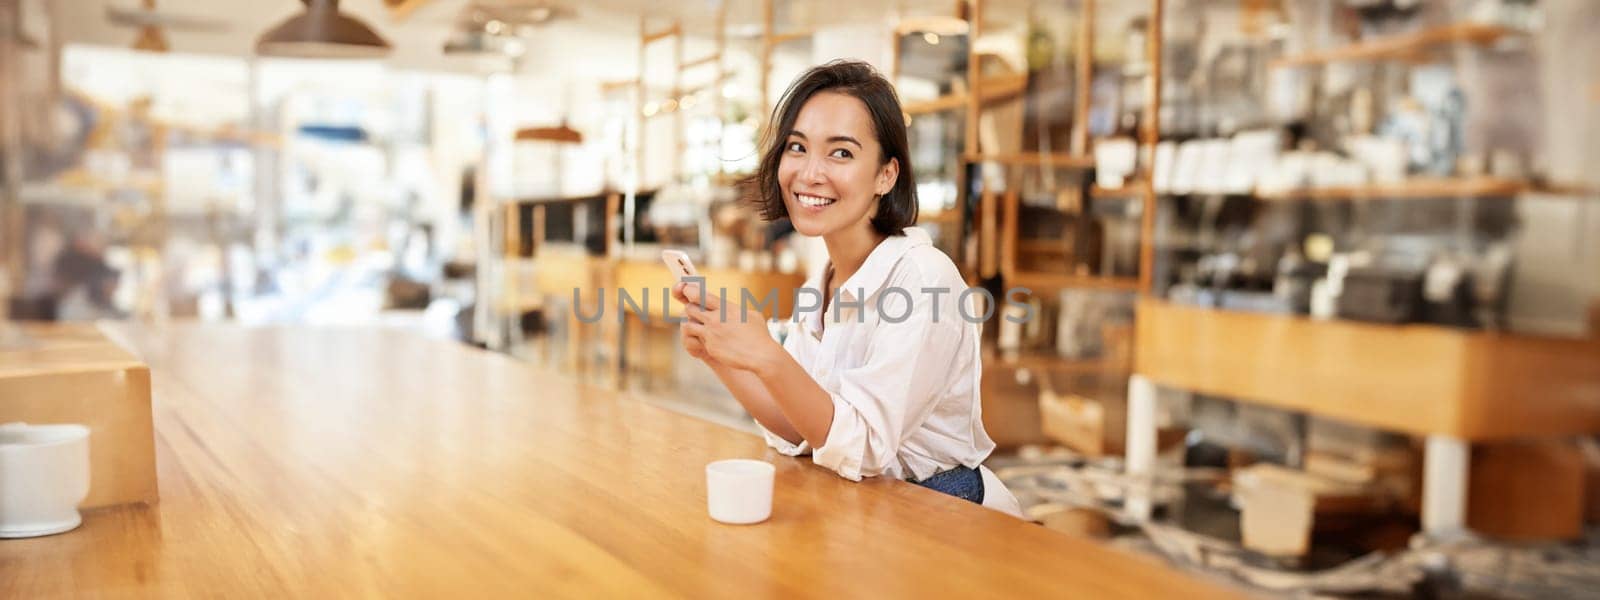 Vertical portrait of stylish asian woman sitting in cafe, drinking coffee and using smartphone. Lifestyle and people concept